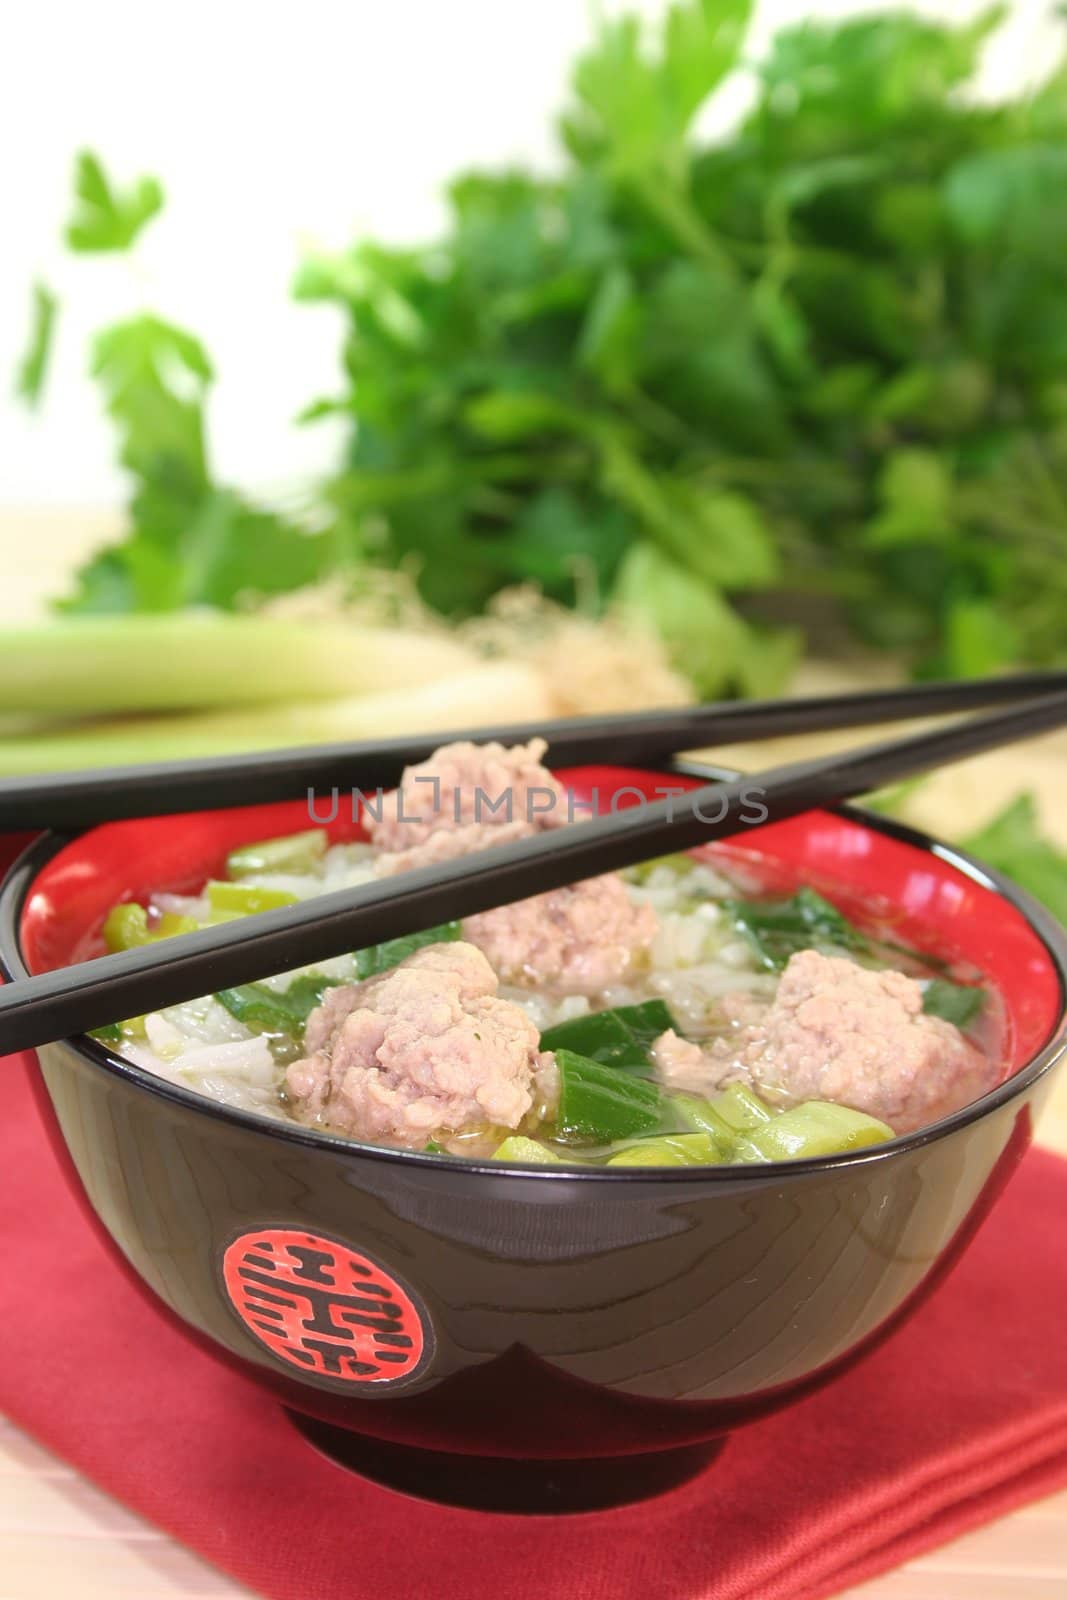 rice soup with meat balls by discovery